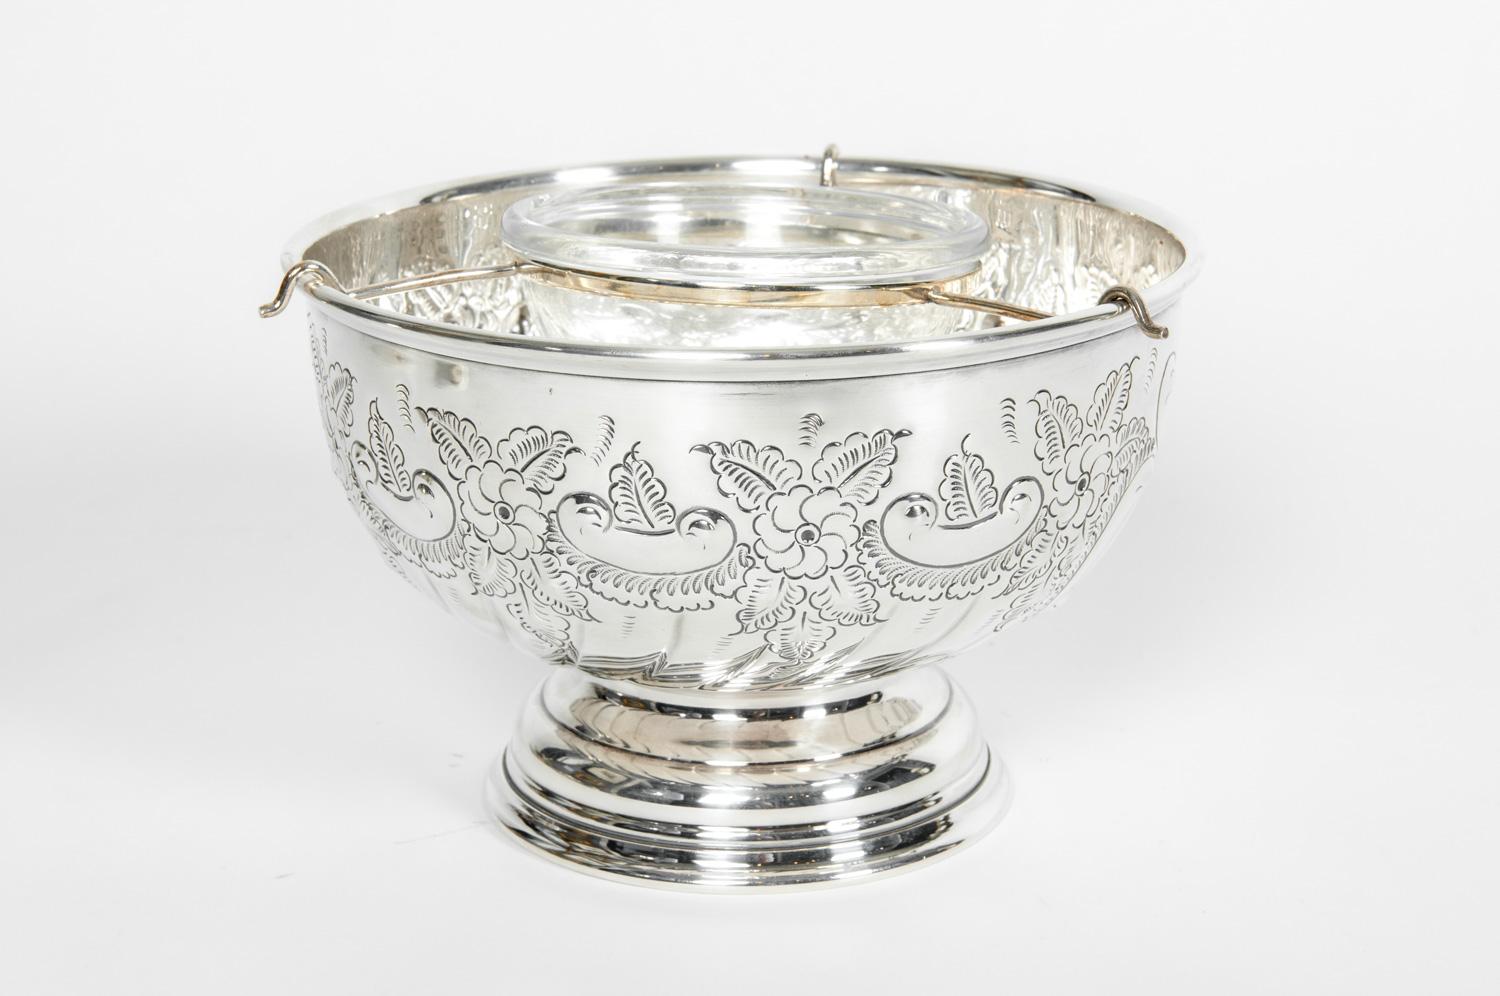 Antique English silver plate caviar dish set. Each piece is in excellent condition, maker's mark undersigned. The silver plate bowl measure 8.4 inches diameter x 5 inches high. The crystal caviar bowl is about 4.4 inches diameter x 2 inches high.